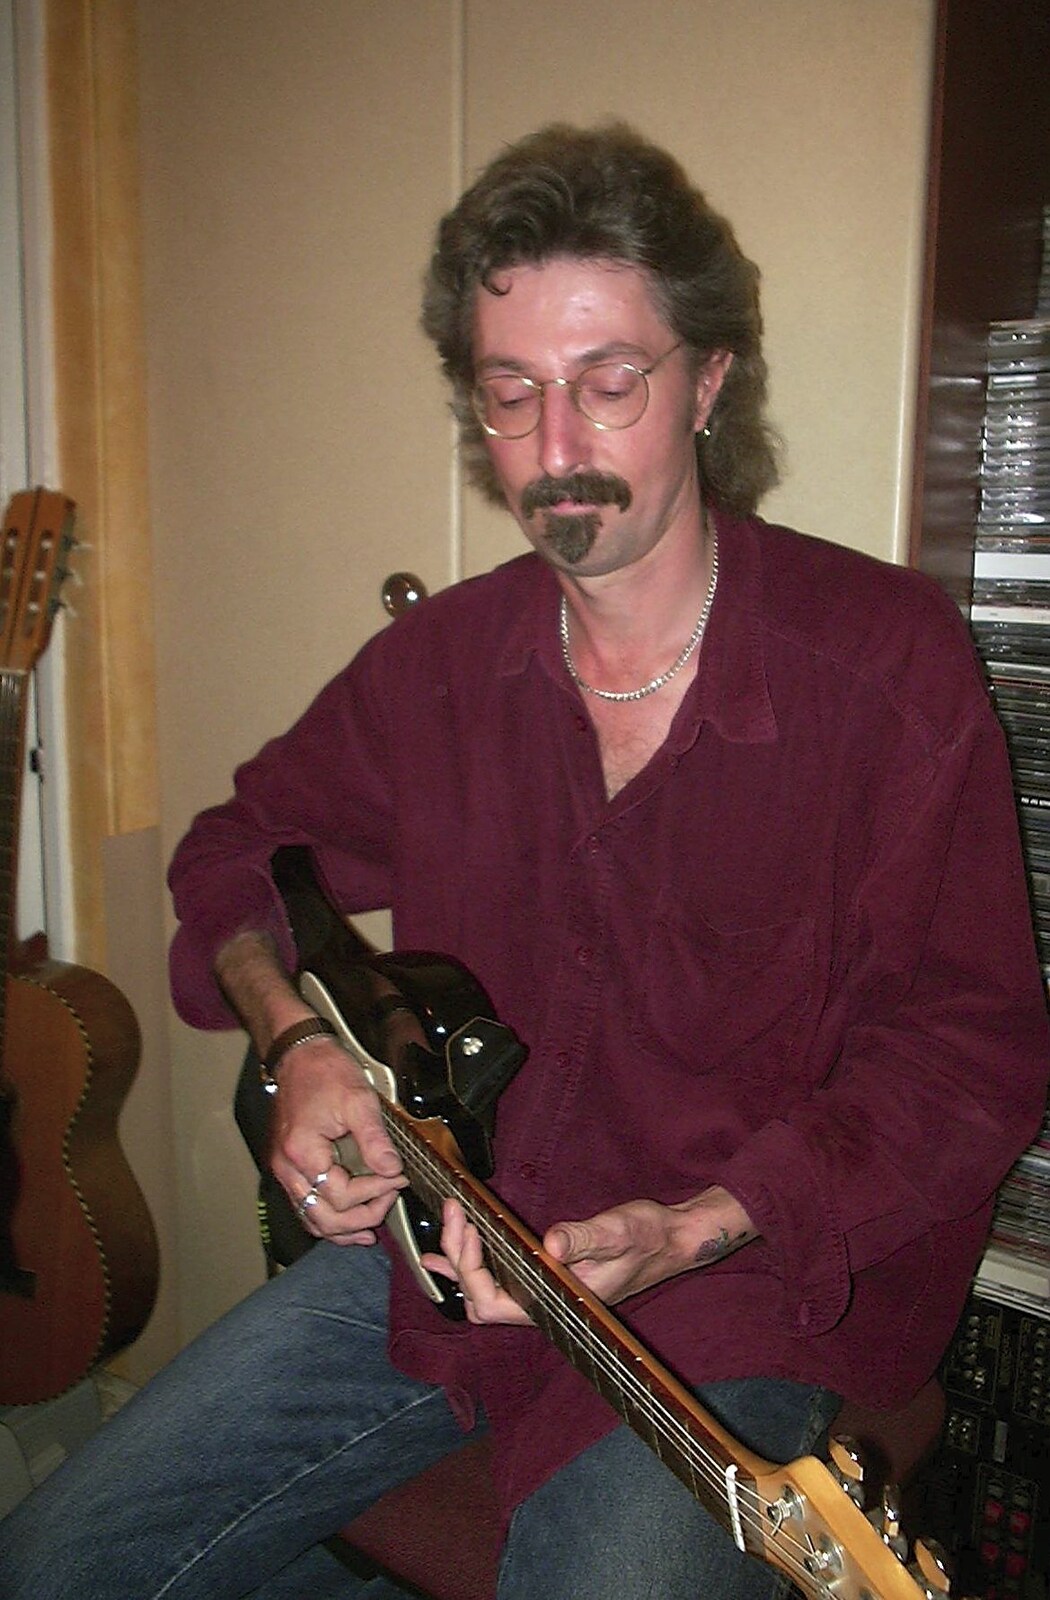 Rob fiddles around on guitar from A Trip to Libertyville, Illinois, USA - 31st August 2004